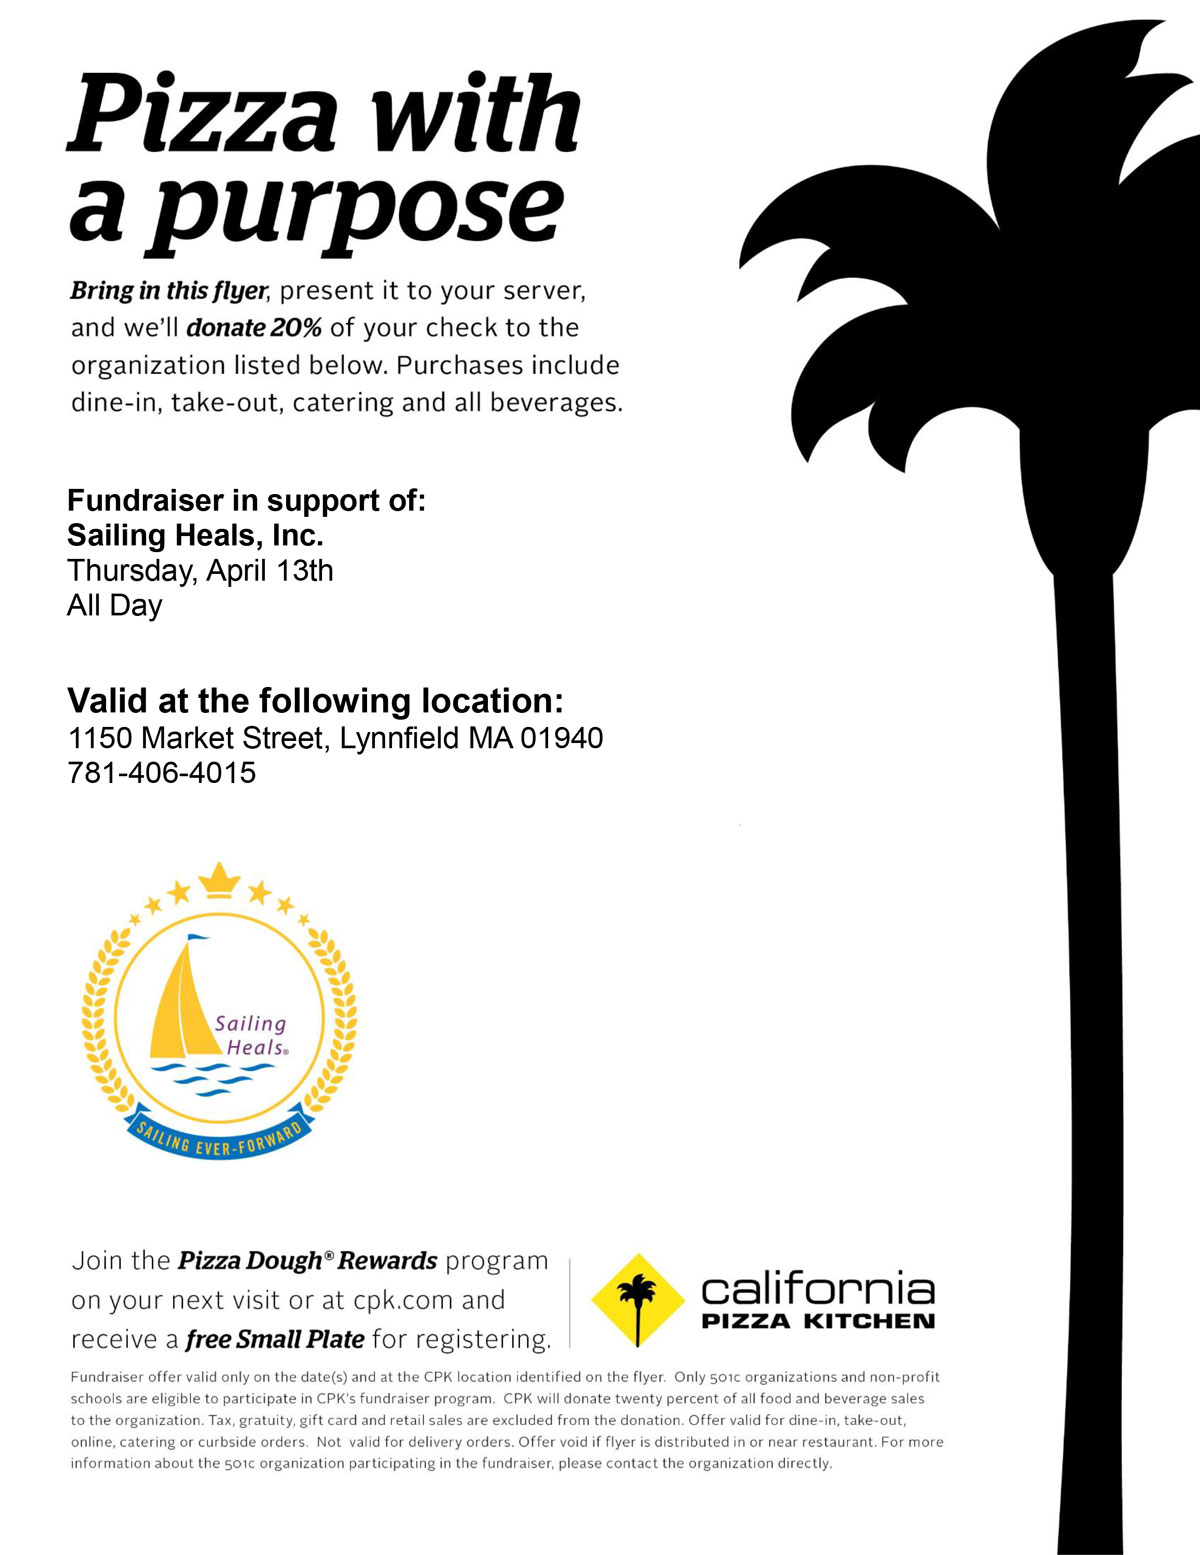 Dine on 4/13 at CPK-Lynnfield & Help Sailing Heals!